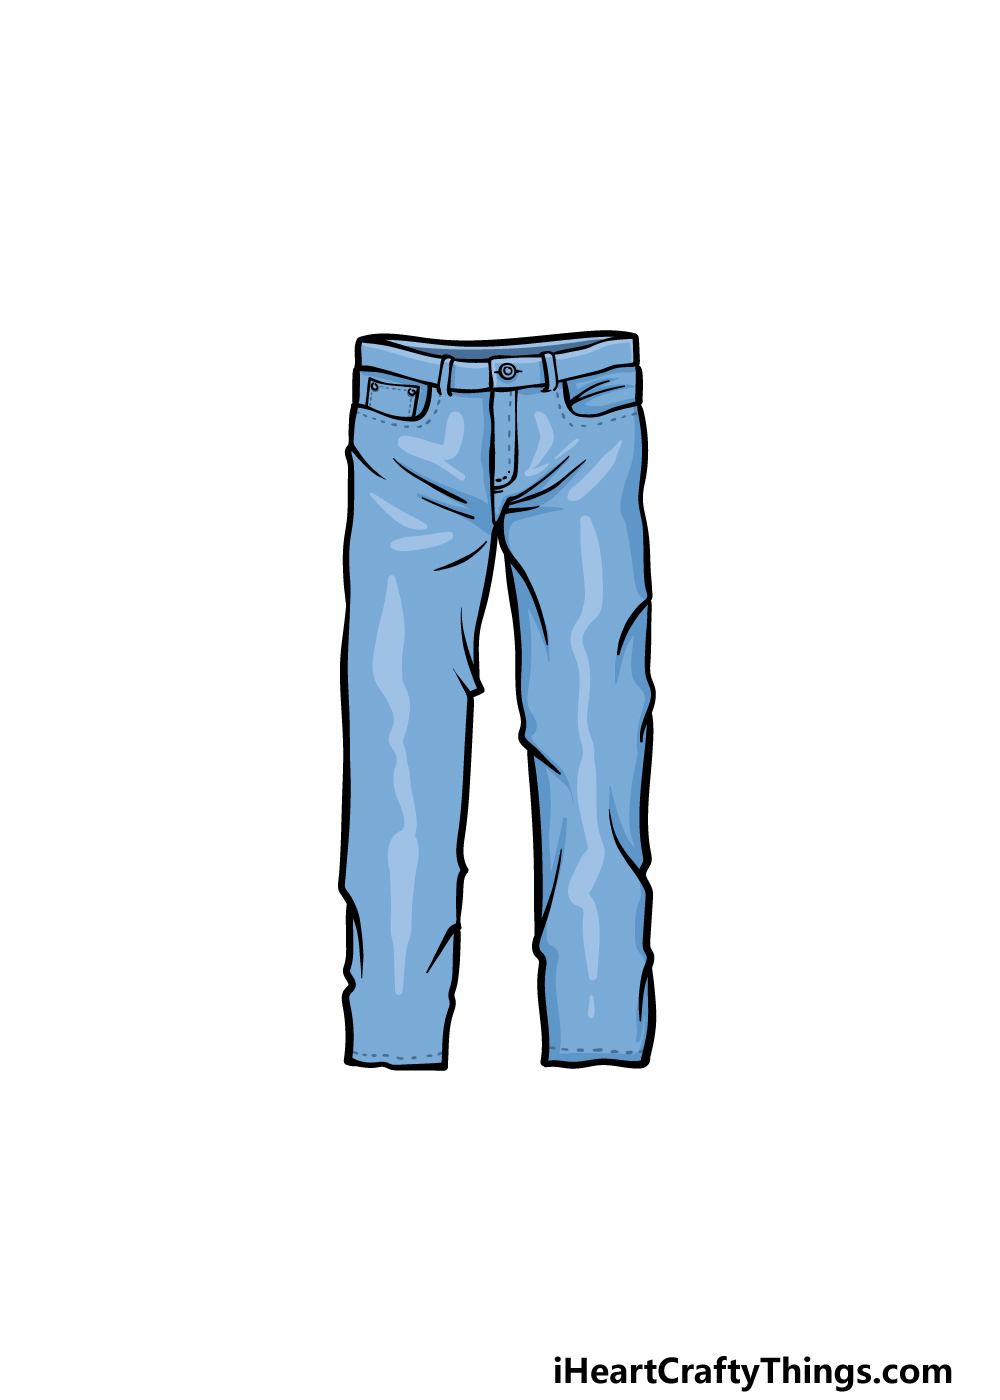 Automatic lip hardware Pants Drawing - How To Draw Pants Step By Step